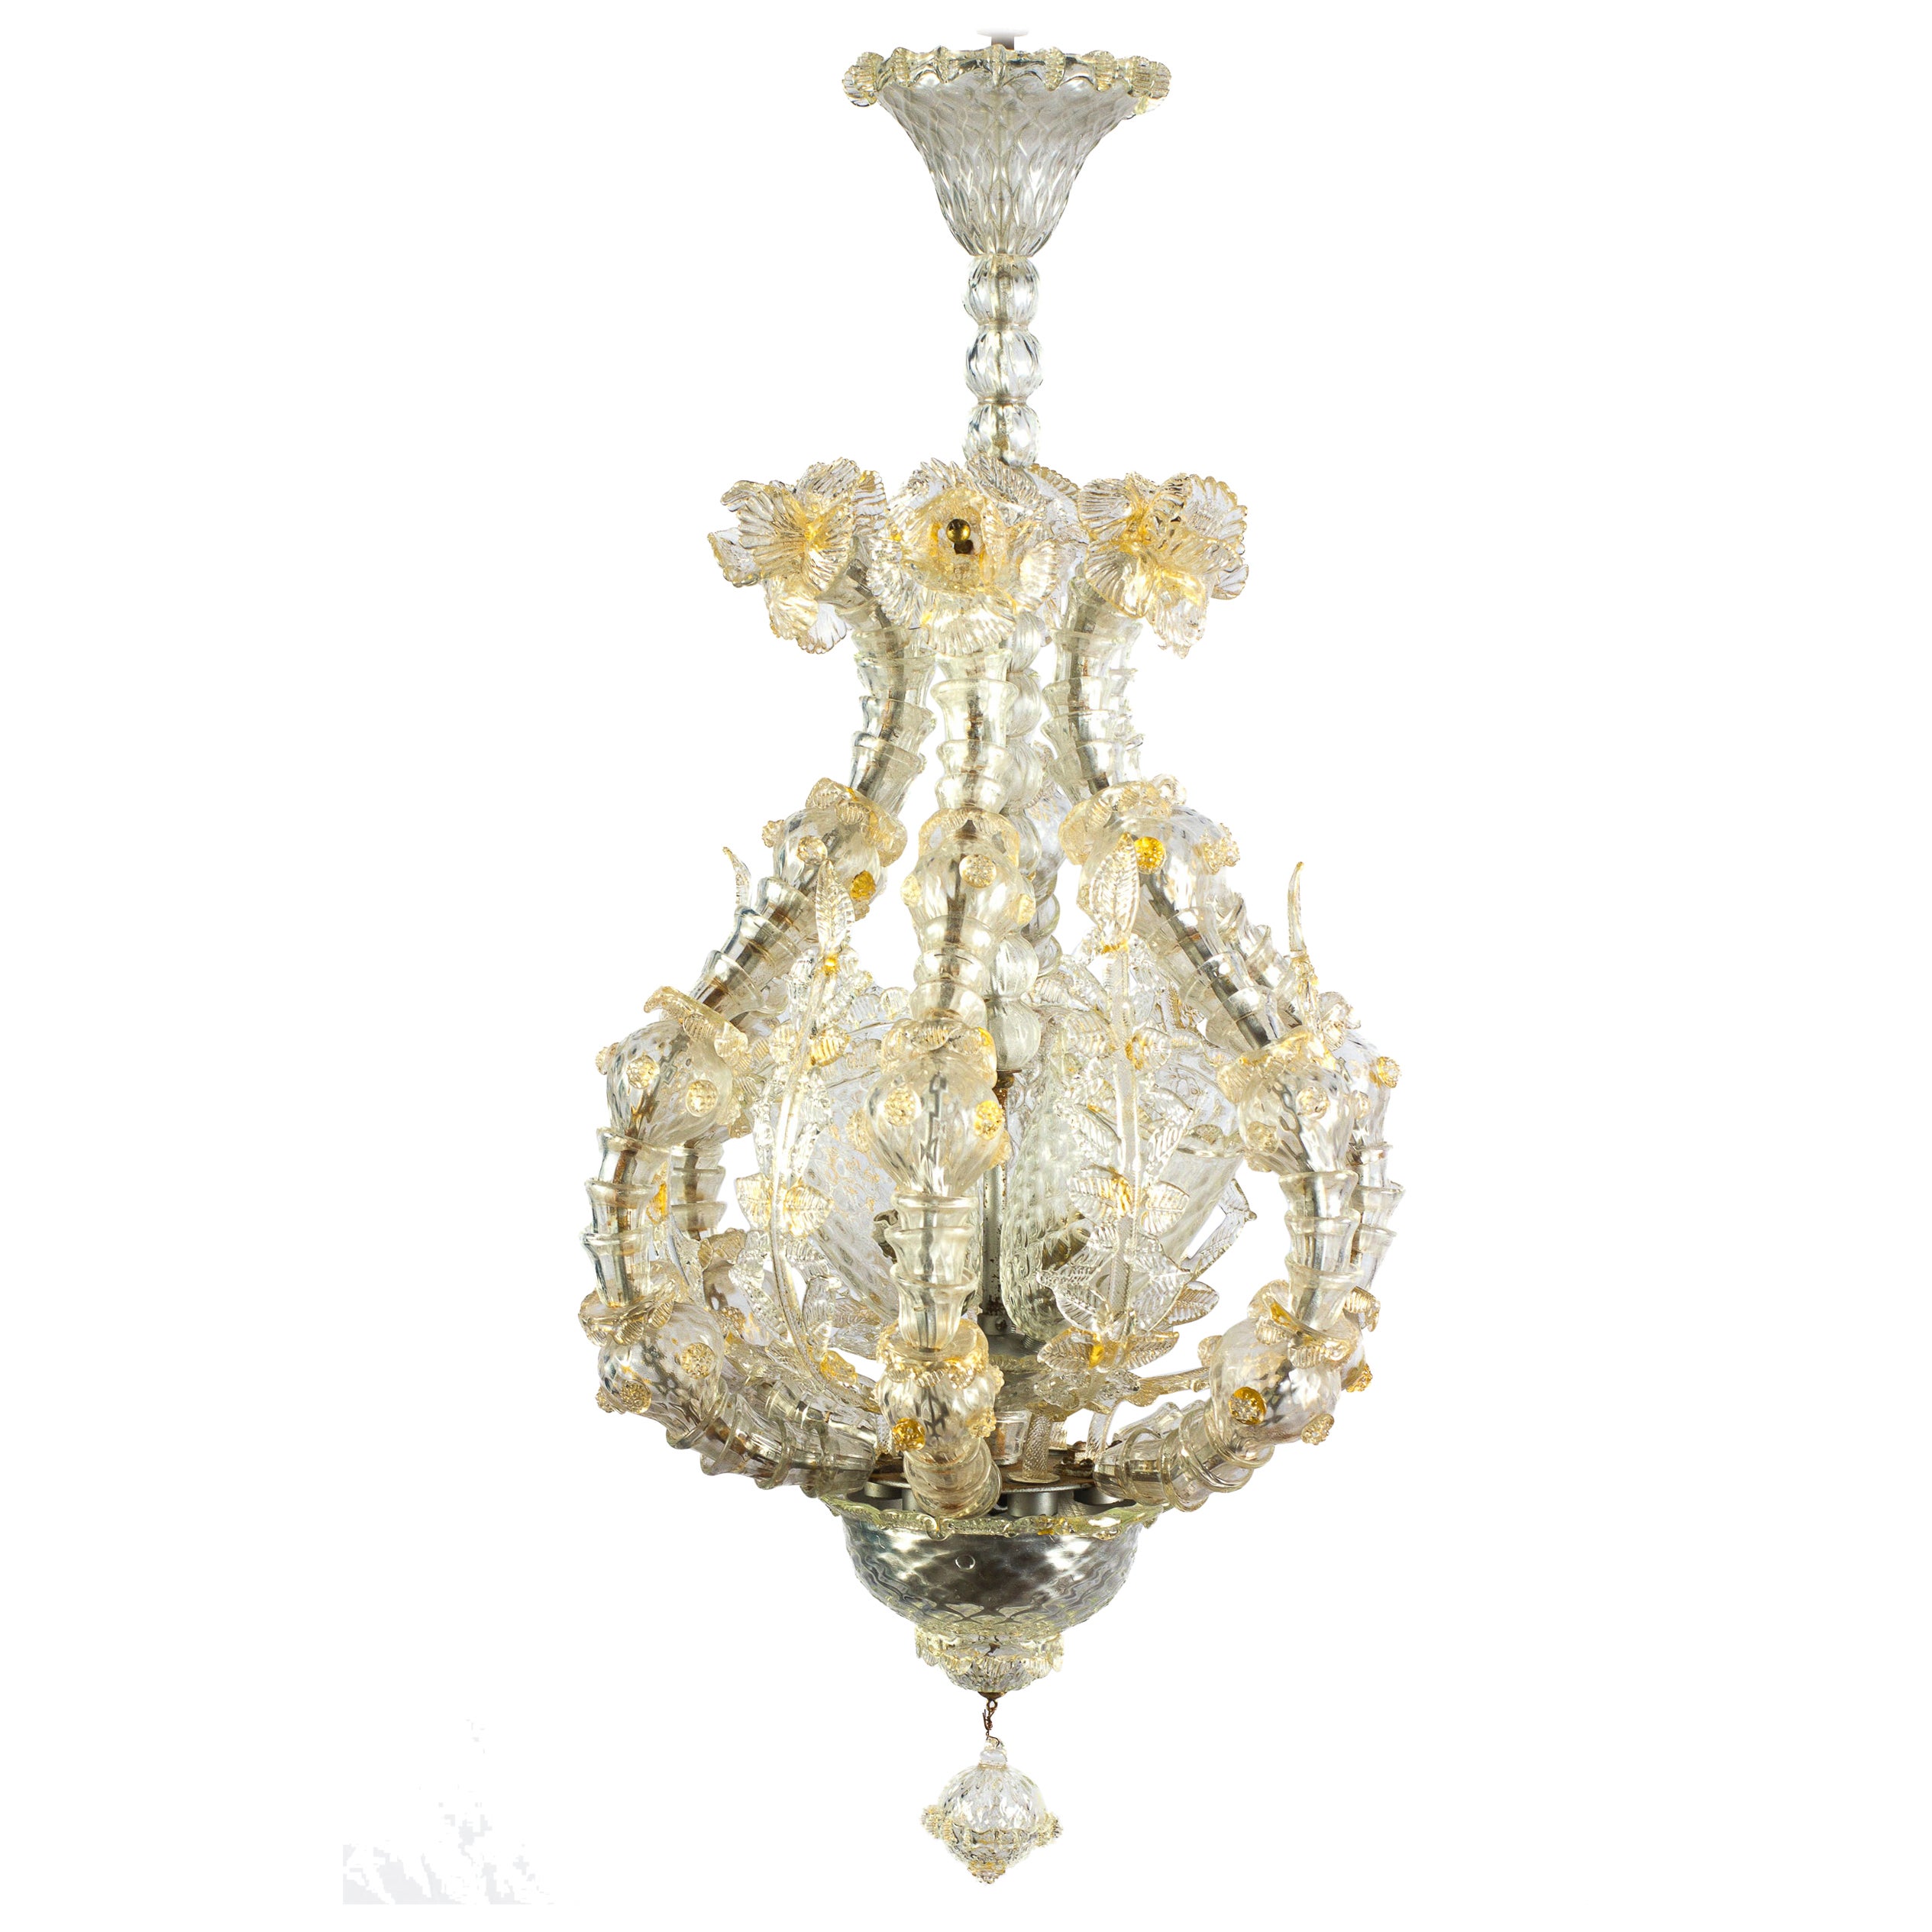 Overwhelming Murano Glass Lantern or Chandelier by Barovier & Toso, 1940'